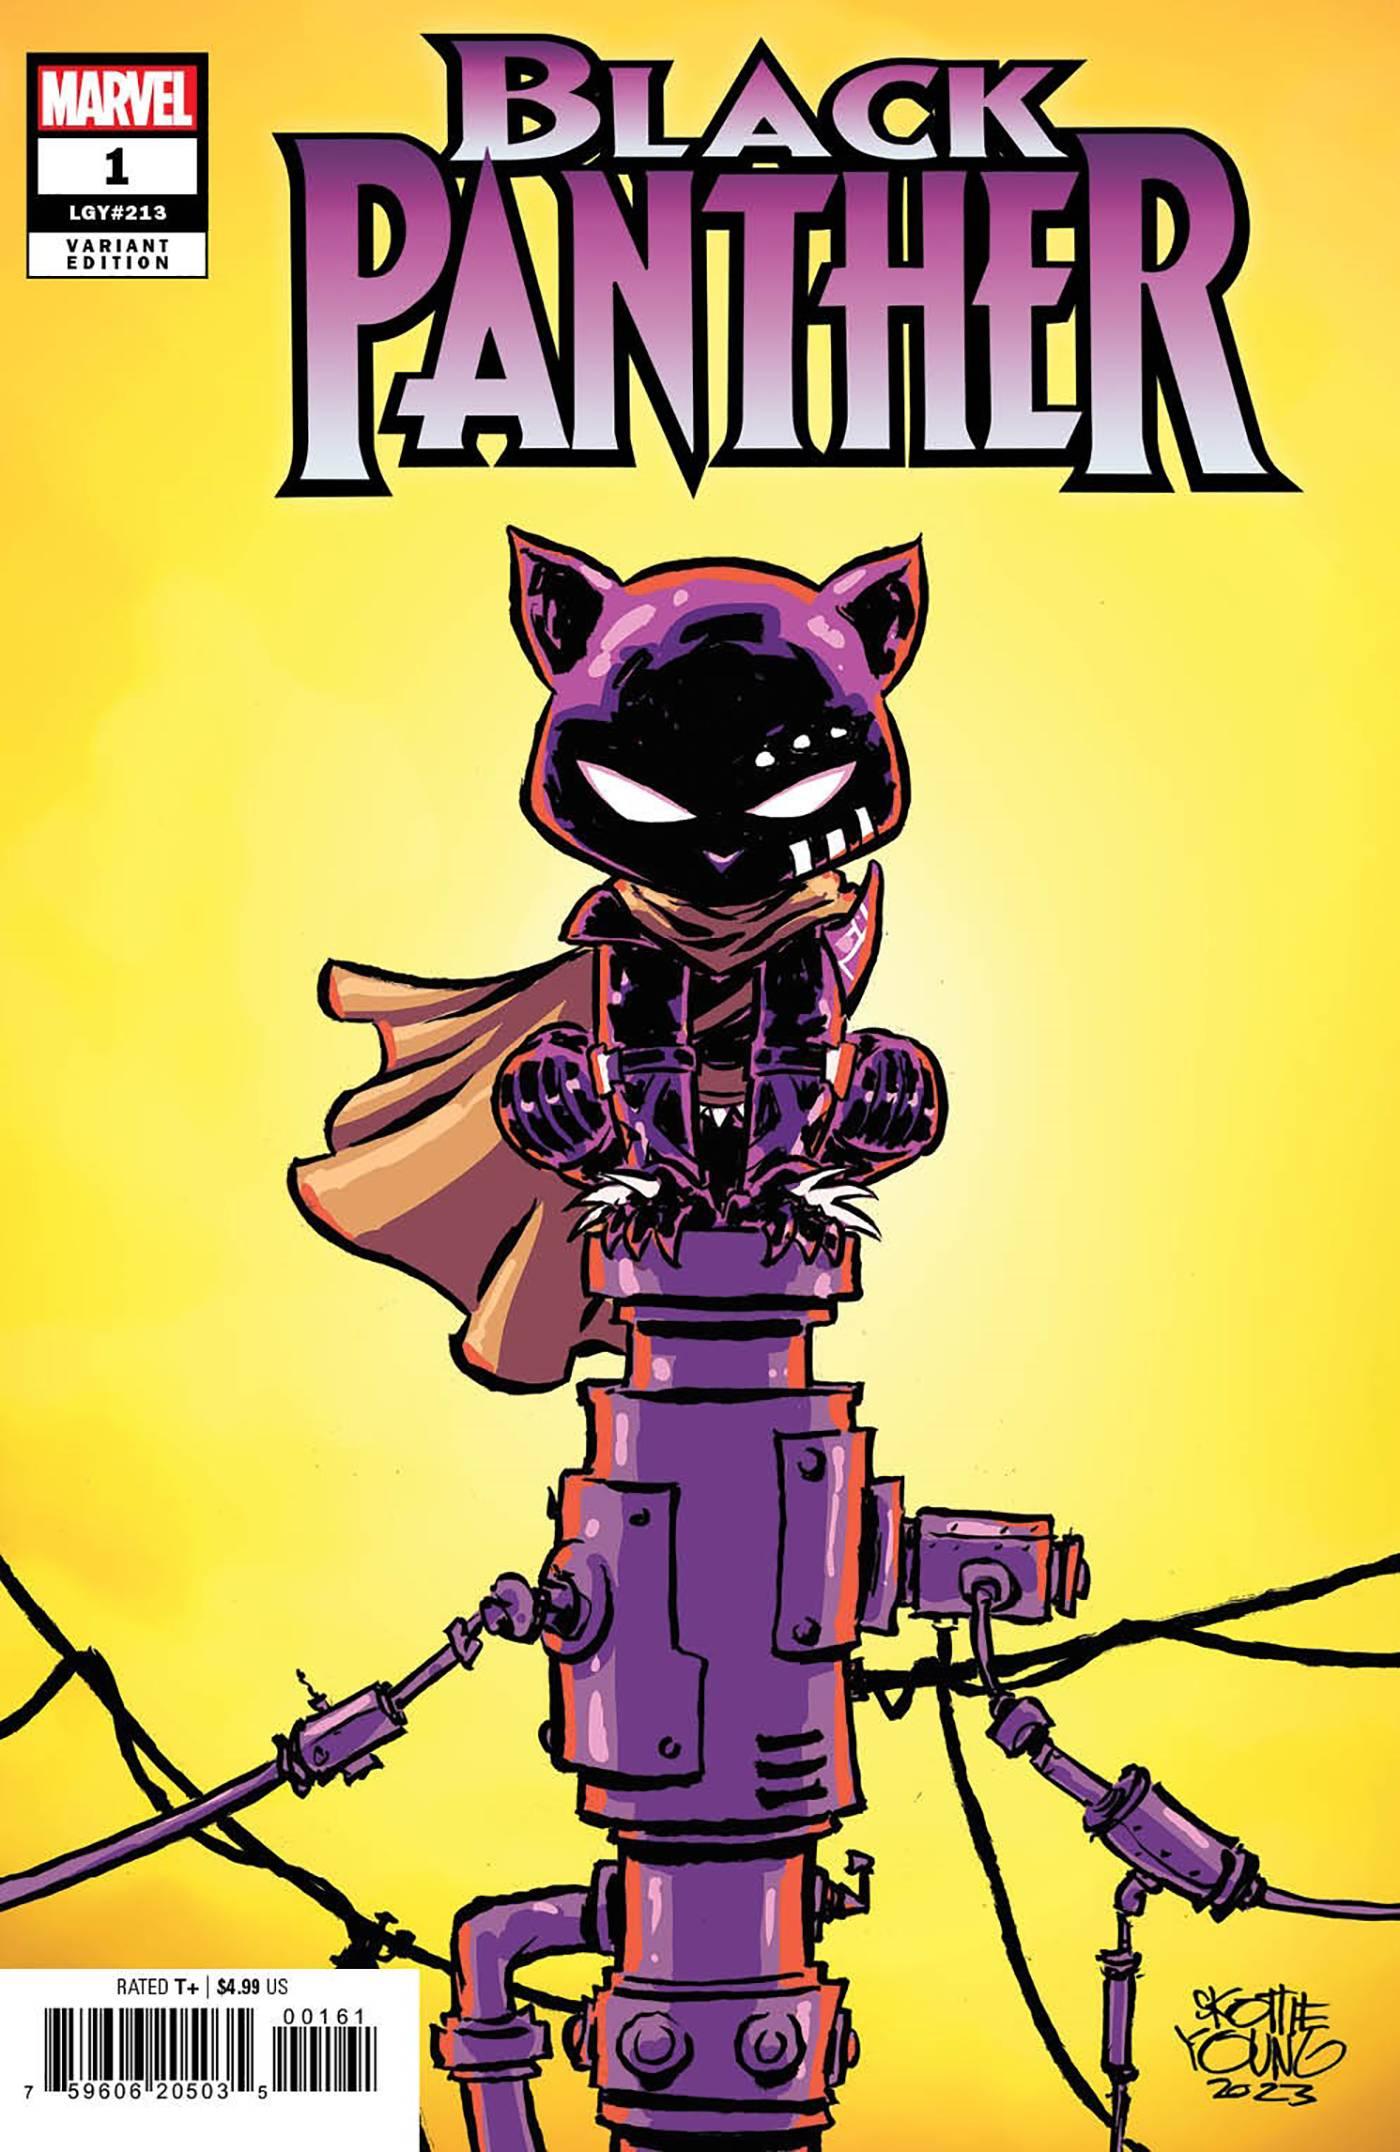 BLACK PANTHER #1 SKOTTIE YOUNG VAR - HolyGrail Comix